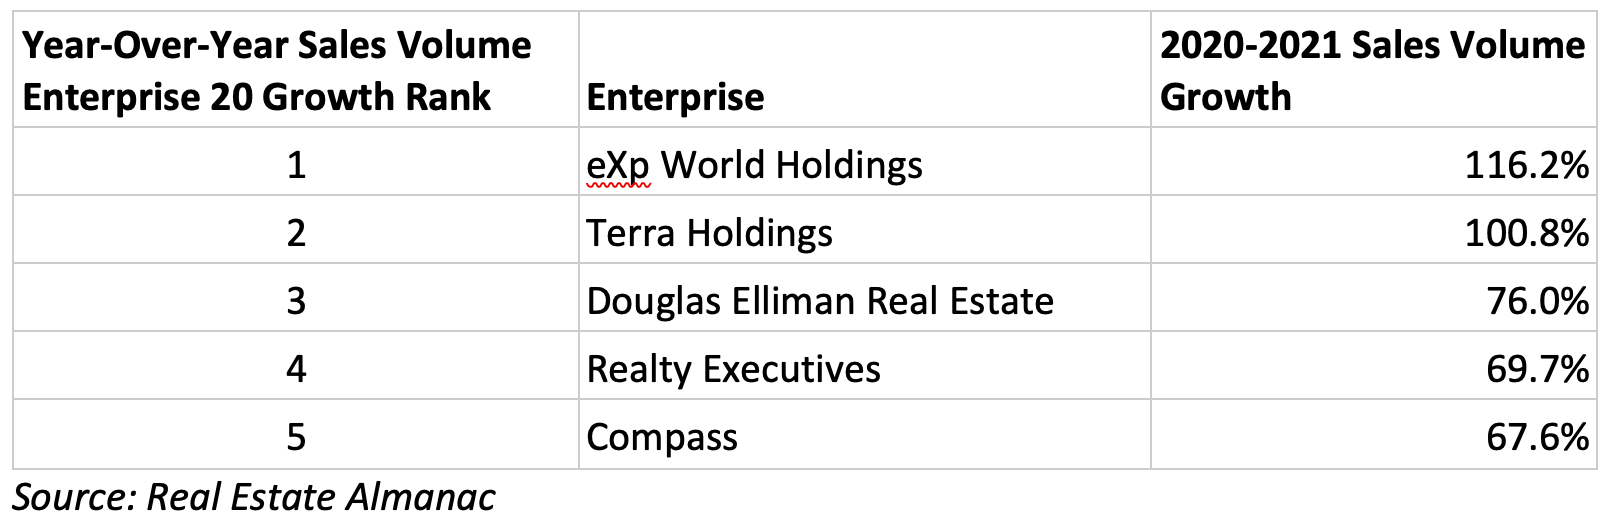 A small table showing the year-over-year growth of the five largest real estate companies via sales.